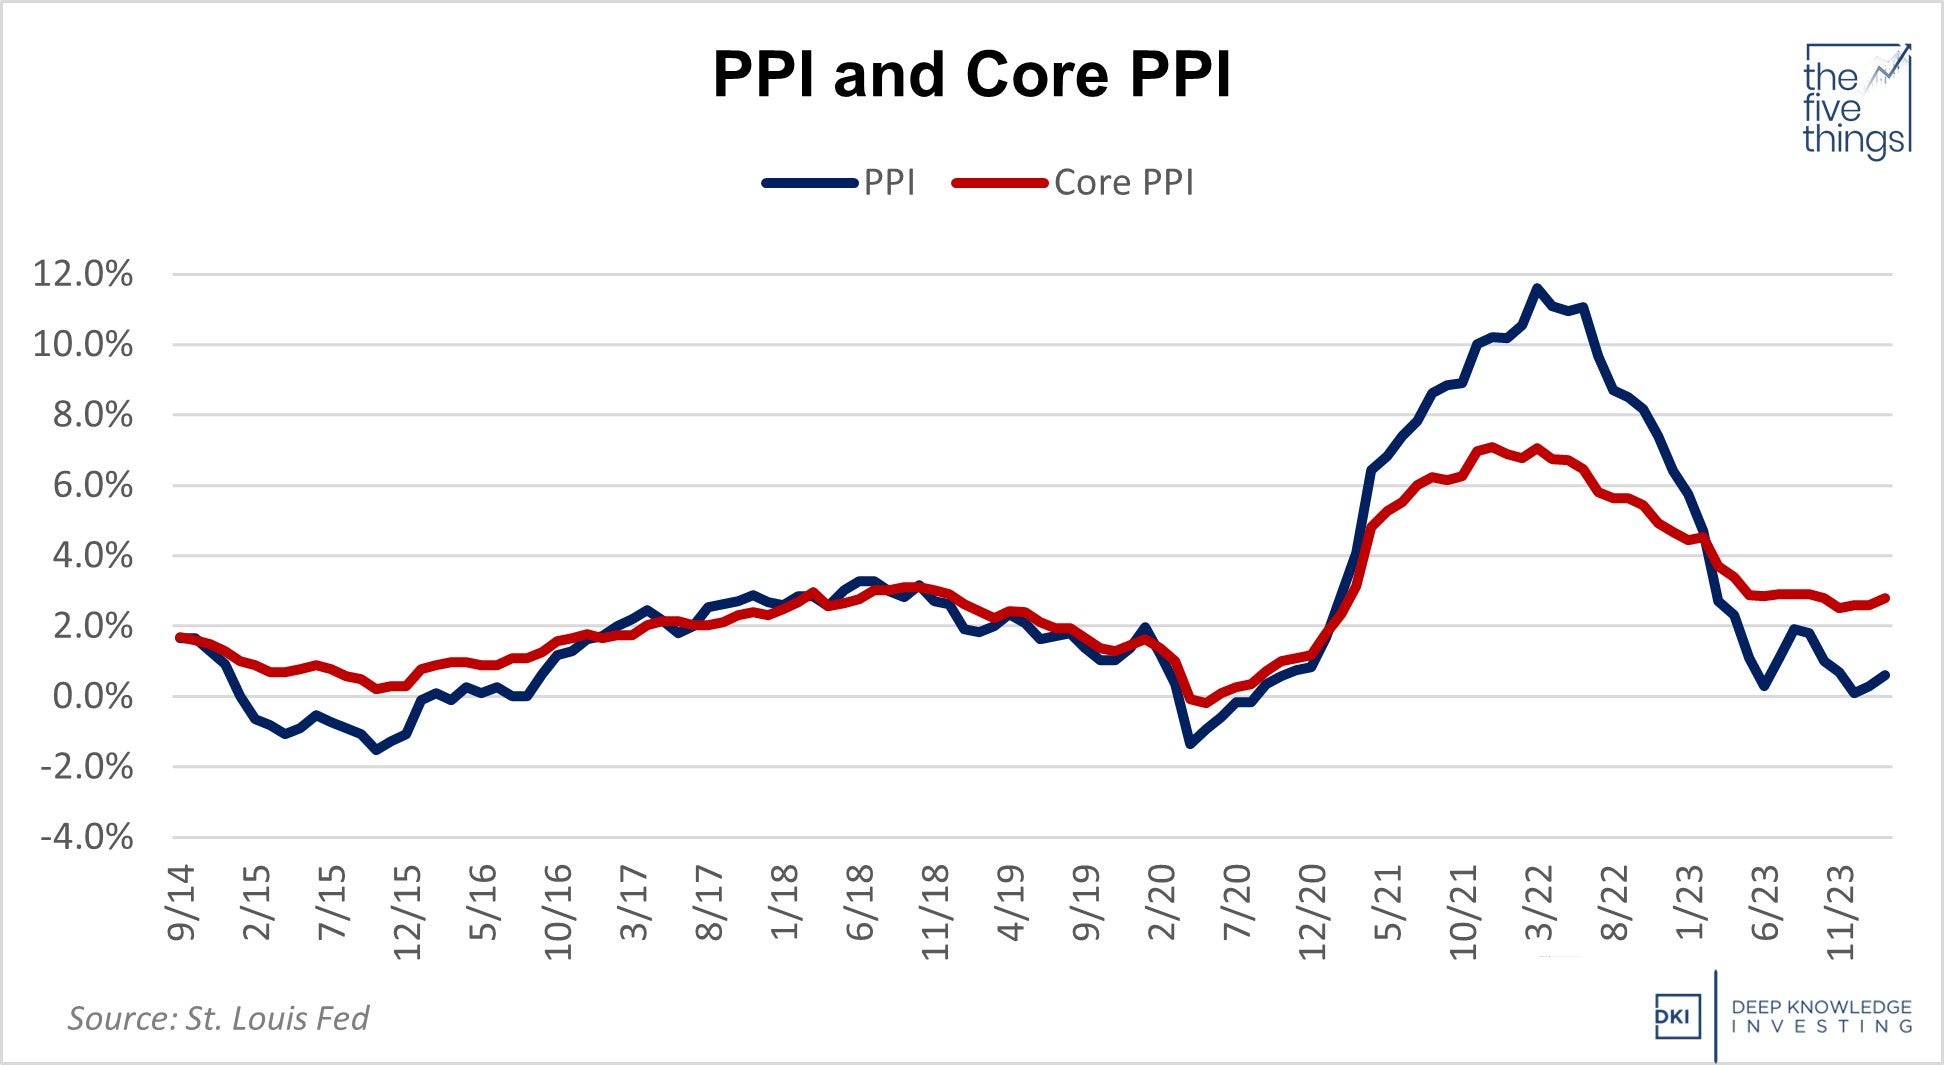 ppi_and_core_ppi_march_15th.jpg